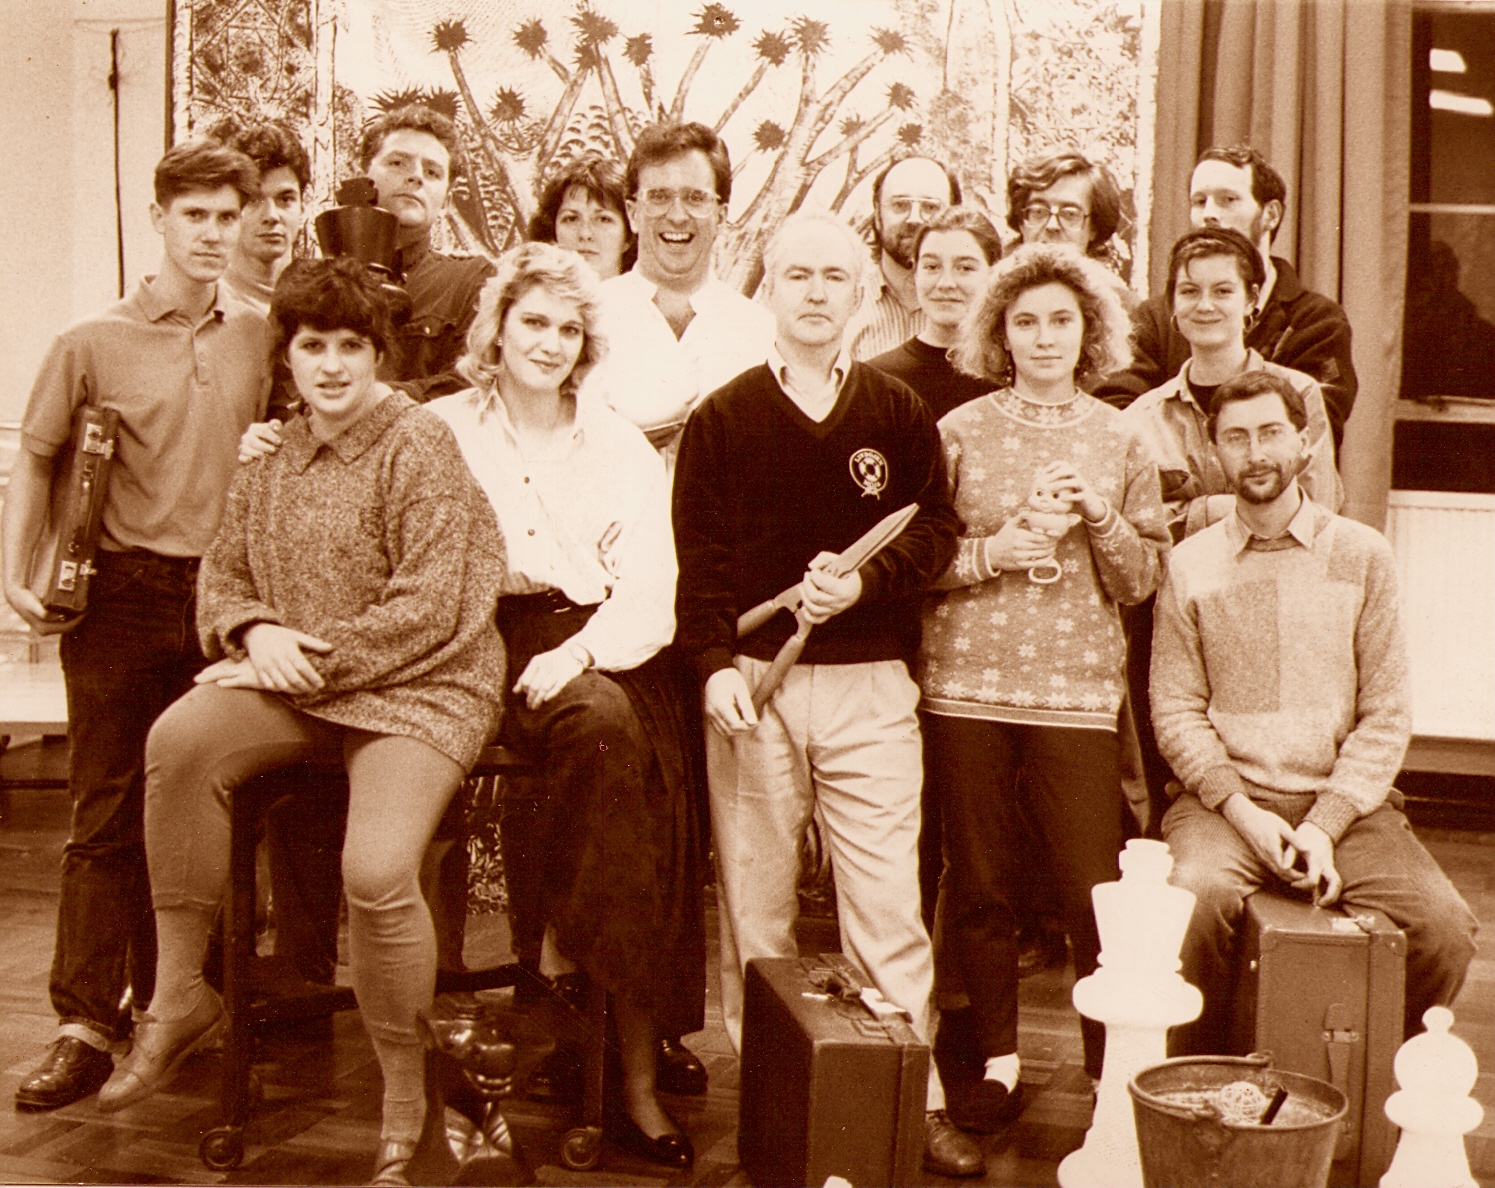 With librettist Marianne Carey at my left, the cast of our opera The Loving of Etain 1990